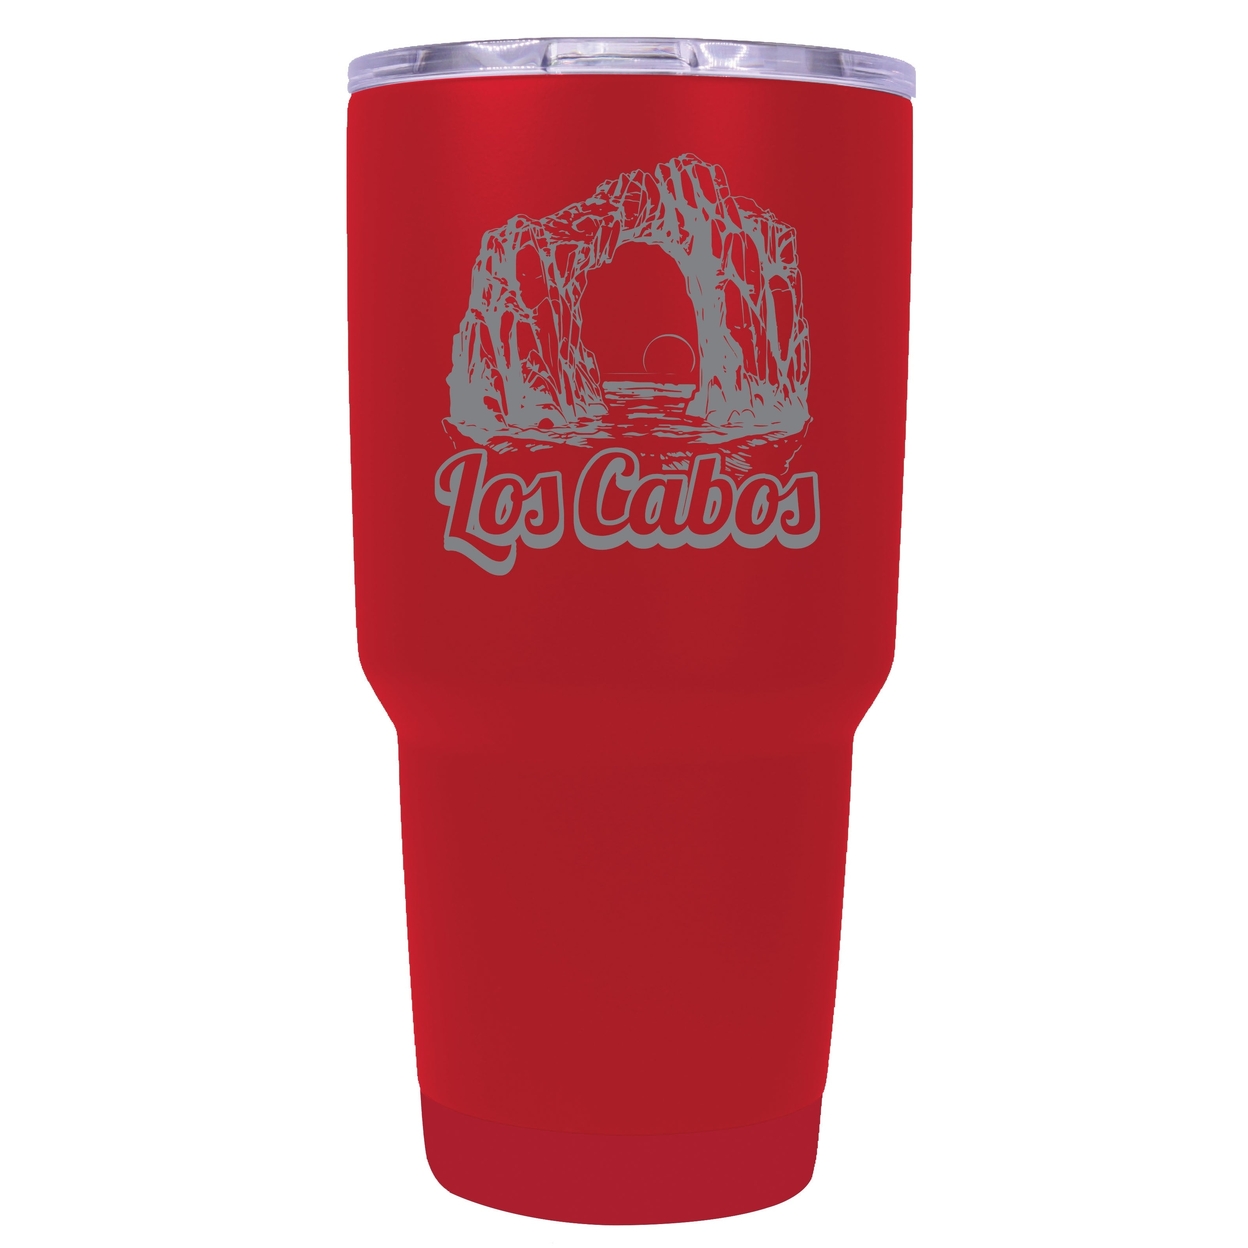 Los Cabos Mexico Souvenir 24 Oz Engraved Insulated Stainless Steel Tumbler - Seafoam,,4-Pack